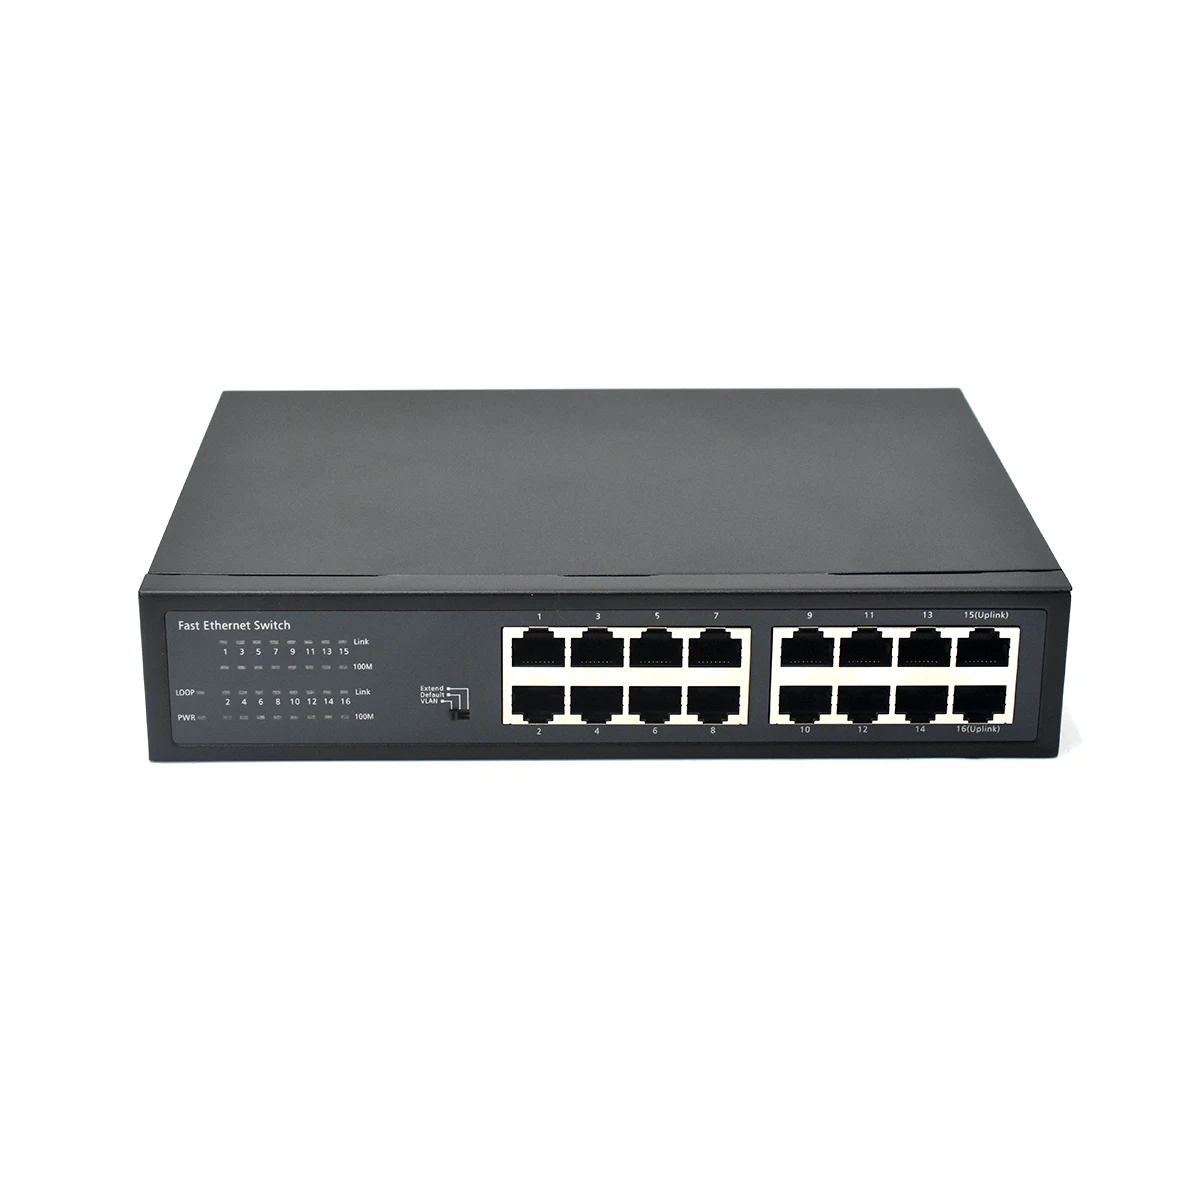 Hotsale Unmanaged Hub network switch 100M trillion 16 Port Ethernet steel shell case Switch with Metal Housing unmanaged switch 8x100base tx poe 1x1000base x sfp poe budget 80w metal case